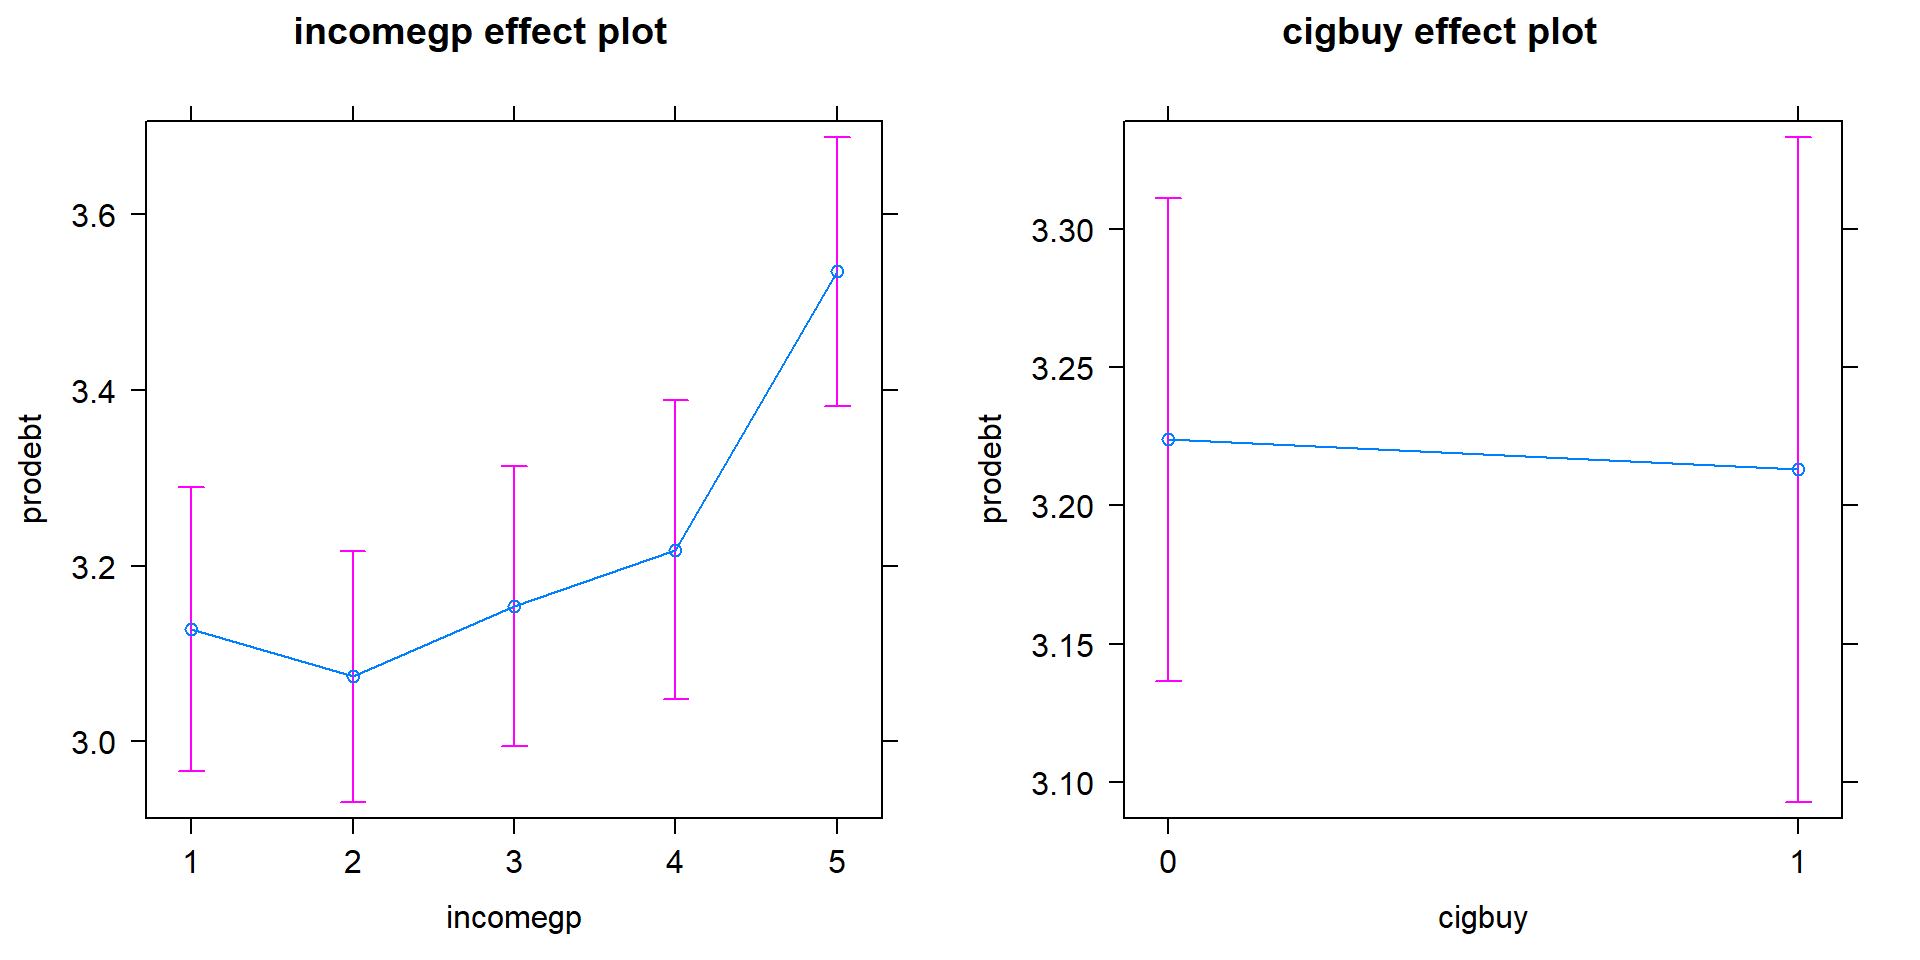 Term-plots for the prodebt response additive model with left panel for income group and the right panel for buying cigarettes or not (0 for no, 1 for yes).